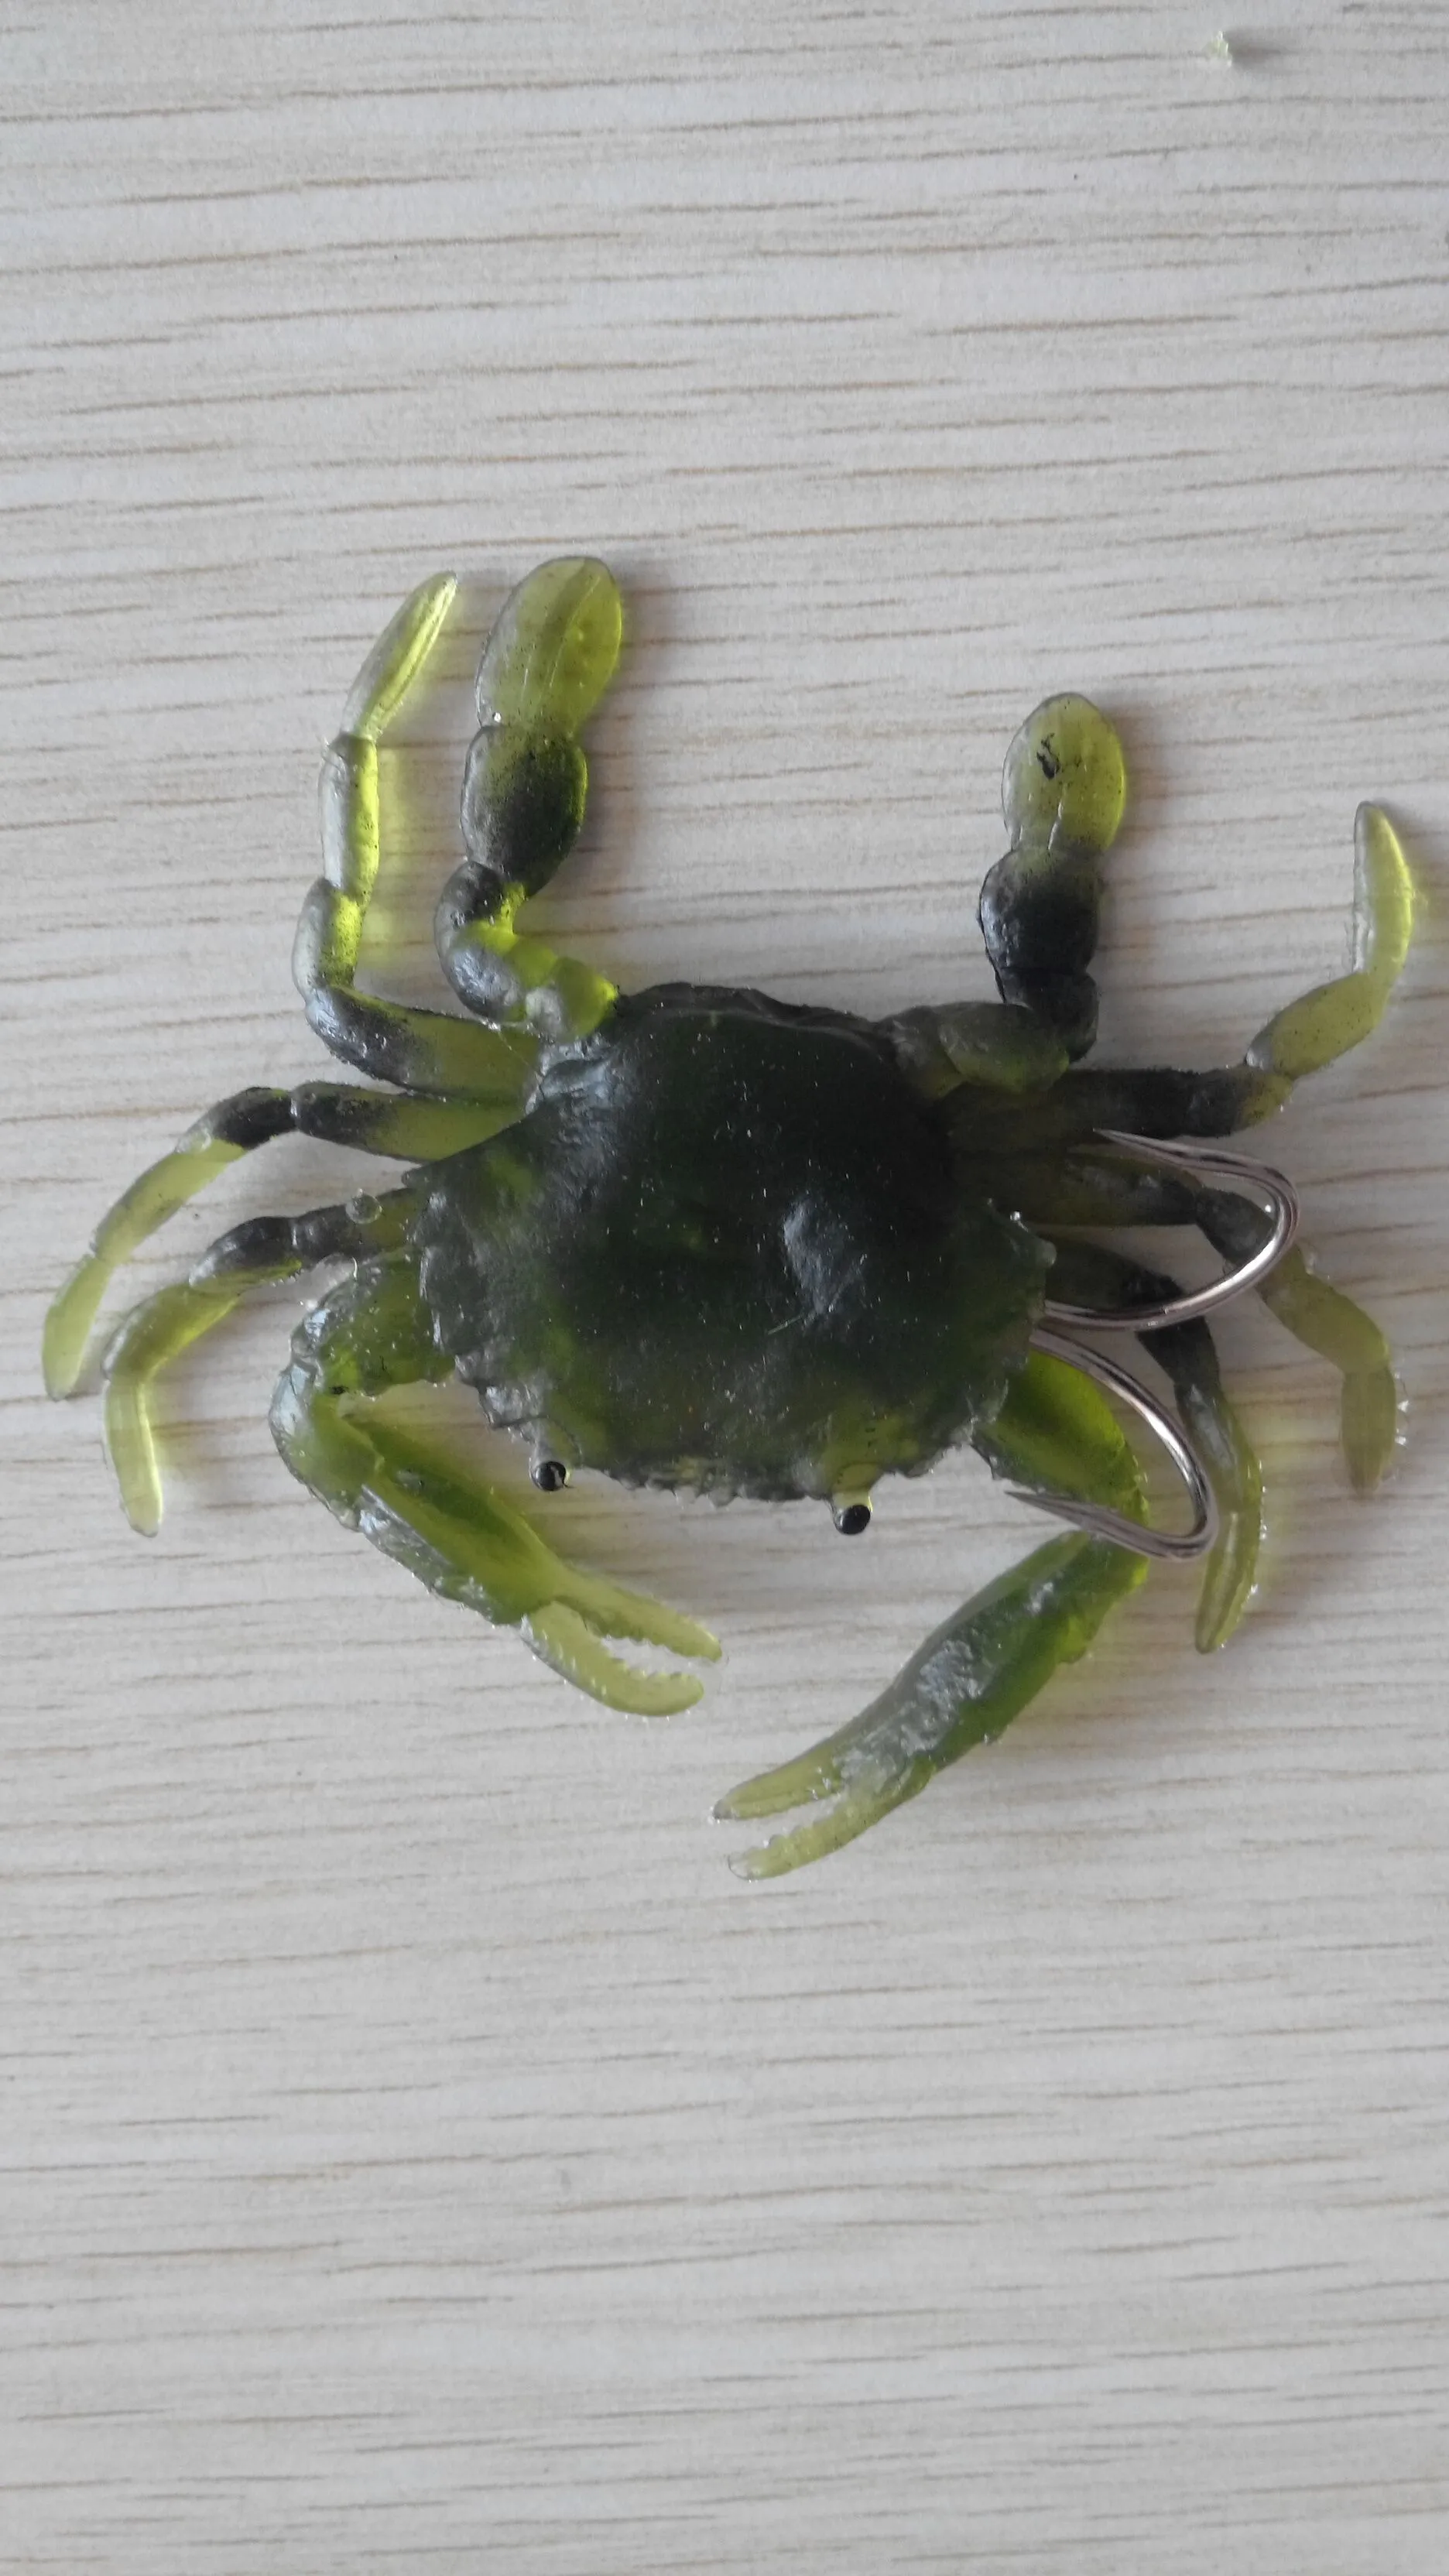 8cm Soft Crab Lure Bait Aritificial Crab With Treble Hook Mix Colour  Order6625235 From Zx8z, $11.27